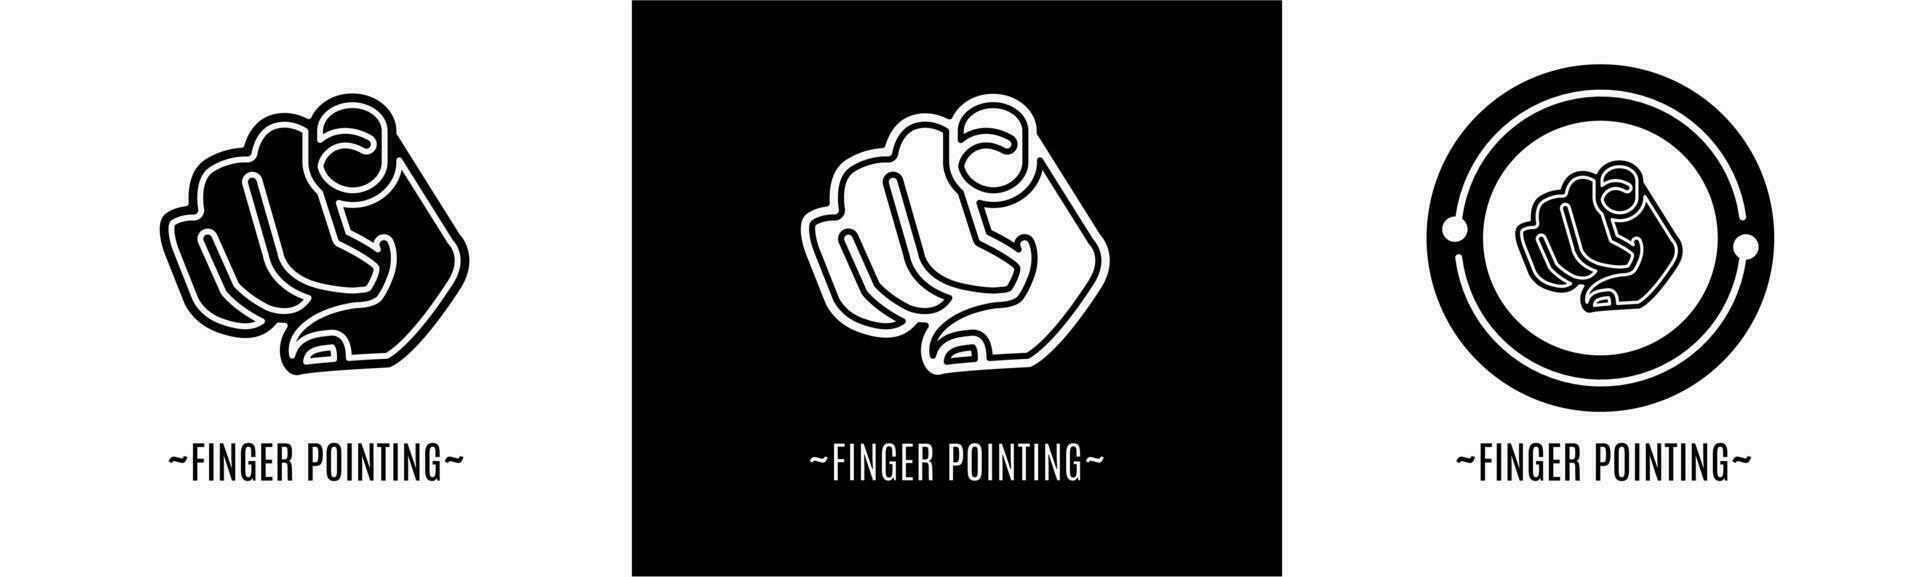 Finger pointing logo set. Collection of black and white logos. Stock vector. vector